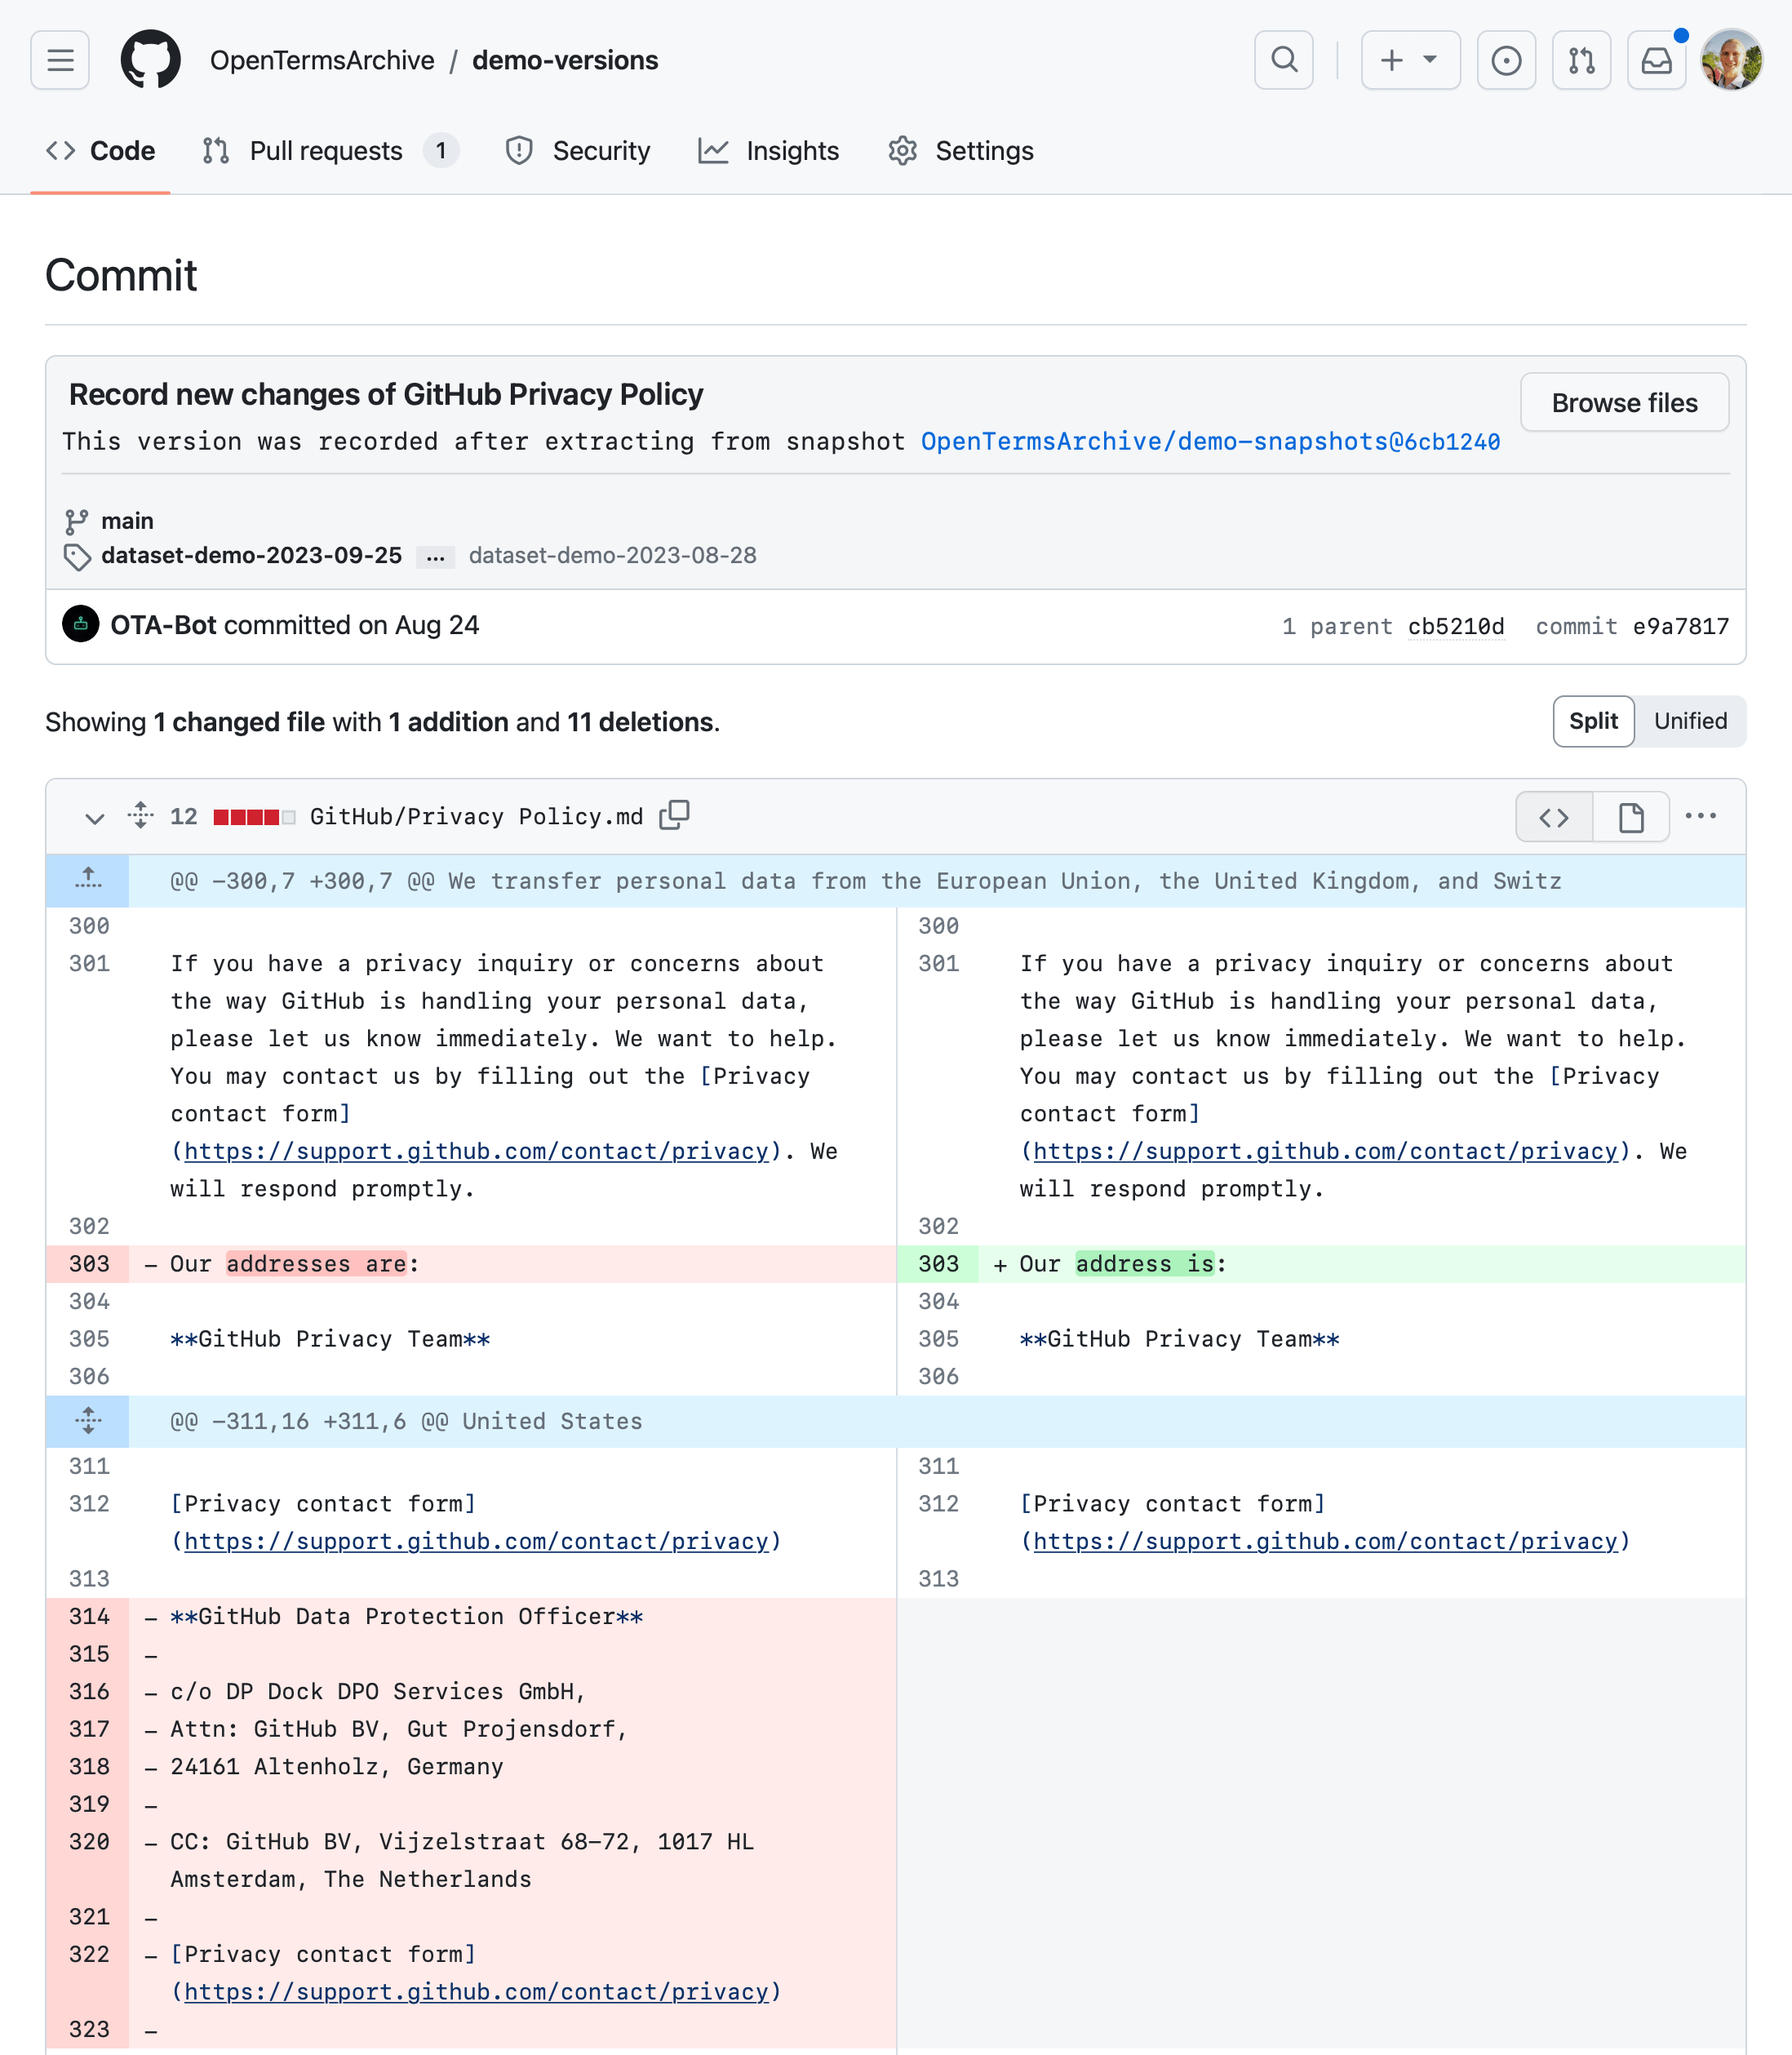 One GitHub Privacy Policy change with source diff view